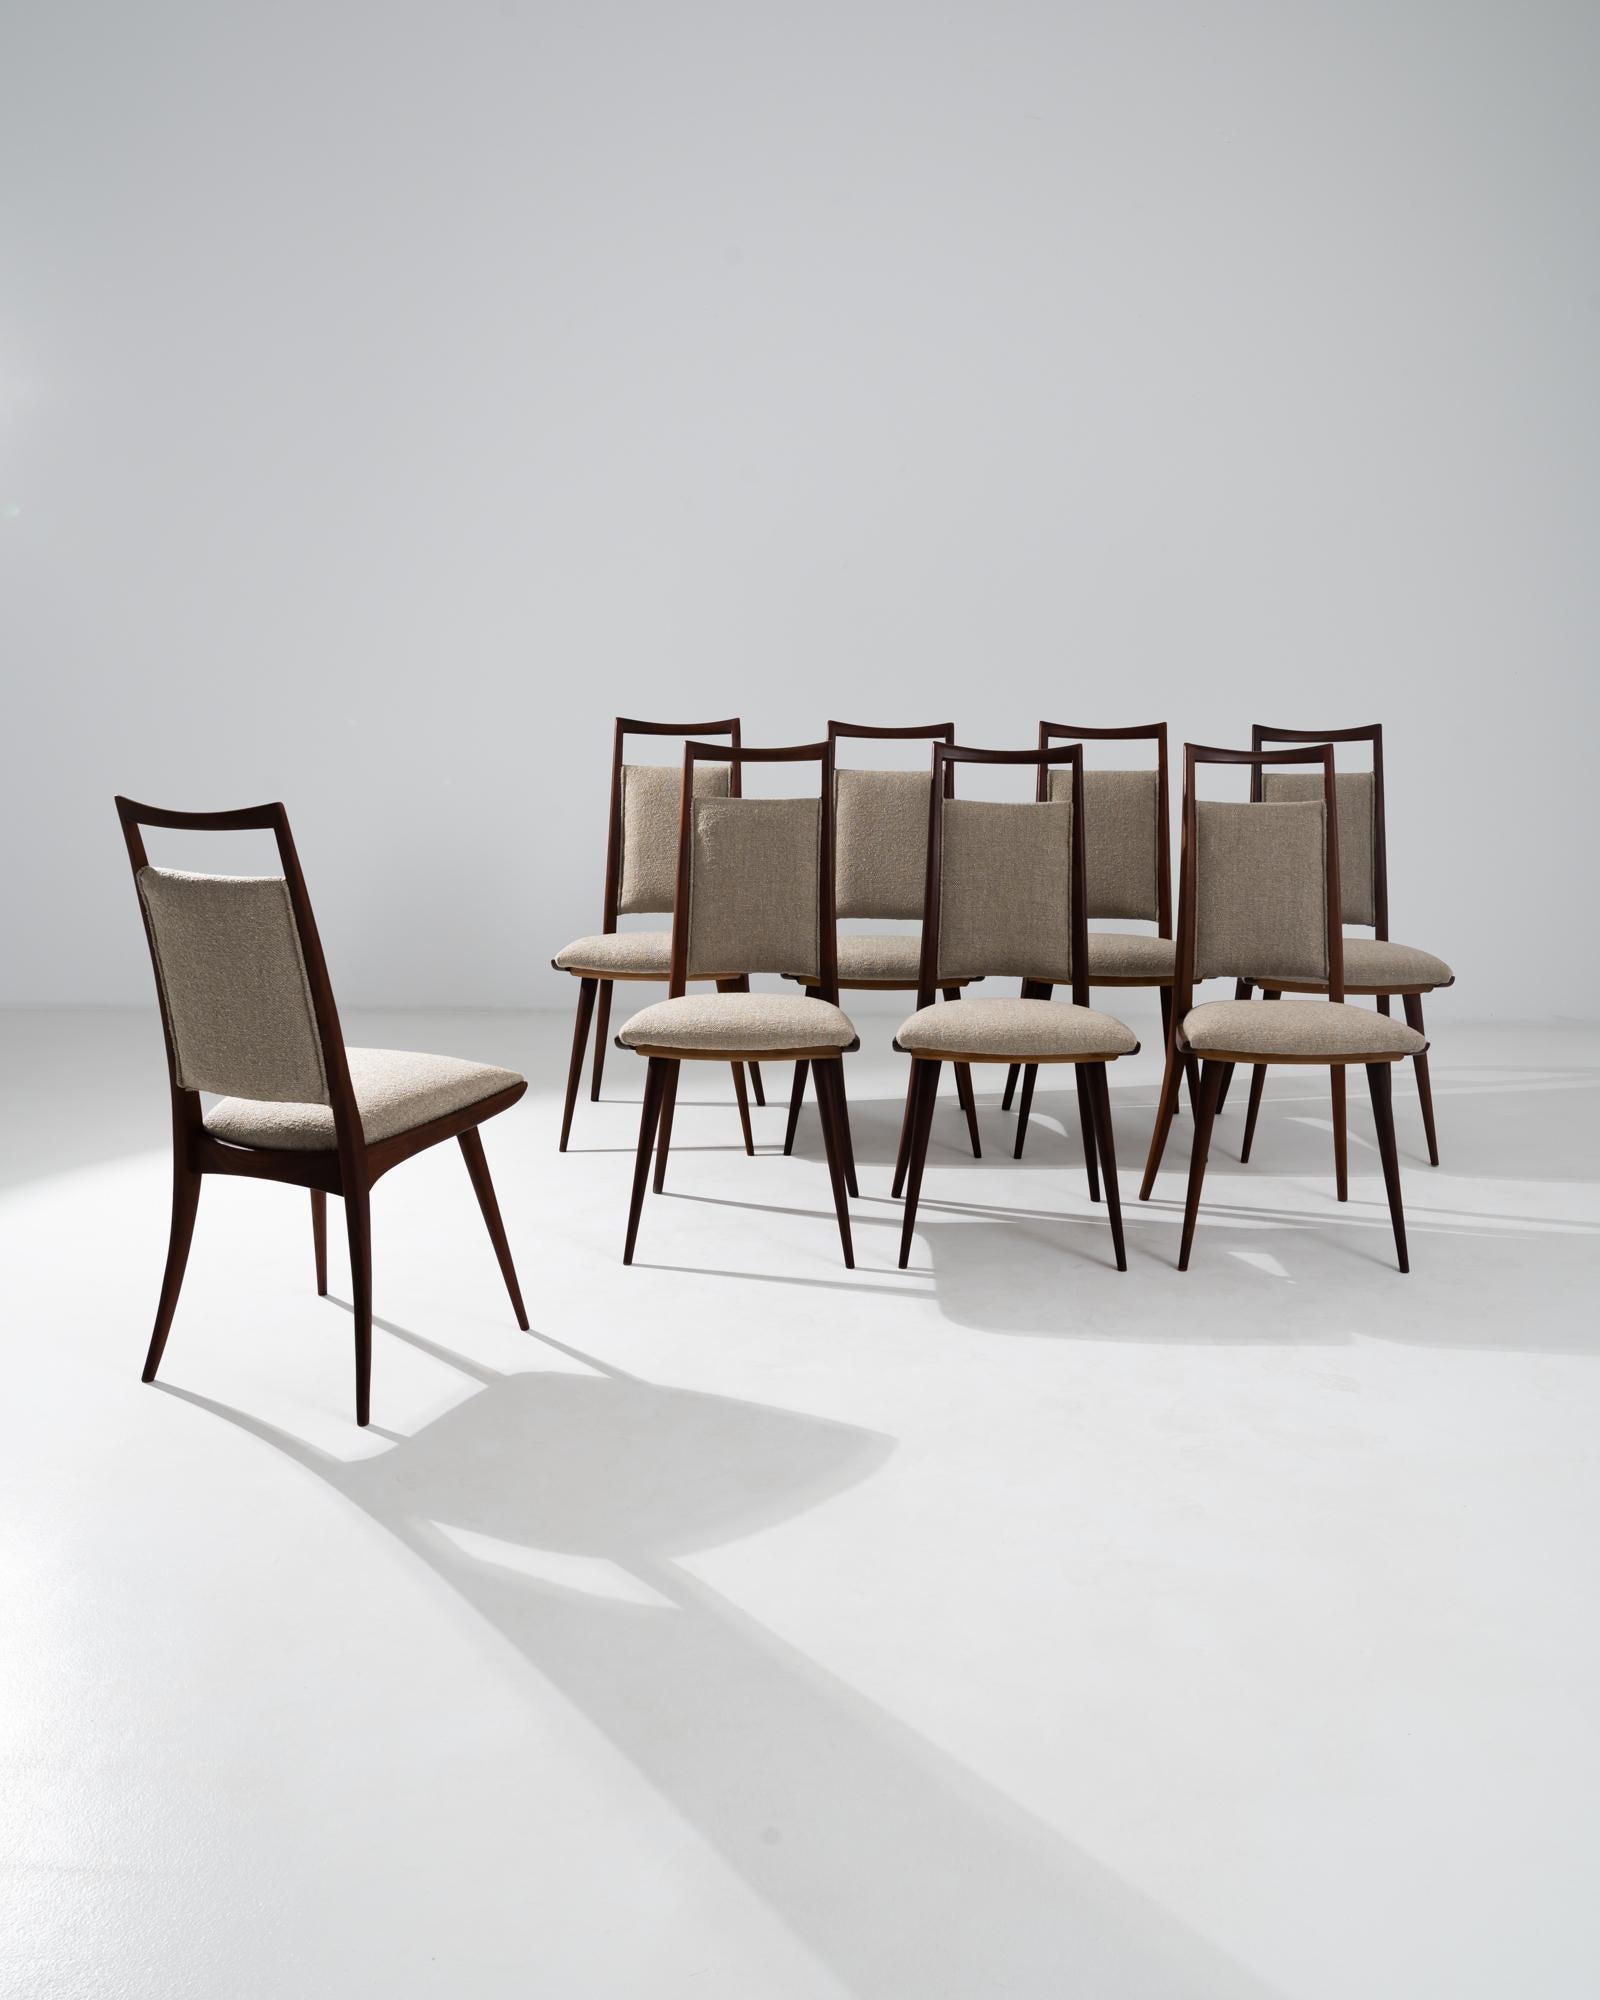 A set of wooden upholstered dining chairs from 20th century Denmark. Known for its mastery of midcentury design, these Danish-made chairs do not disappoint in construction or style. Dark, gleaming wood, angled just so into gently sloping curves,